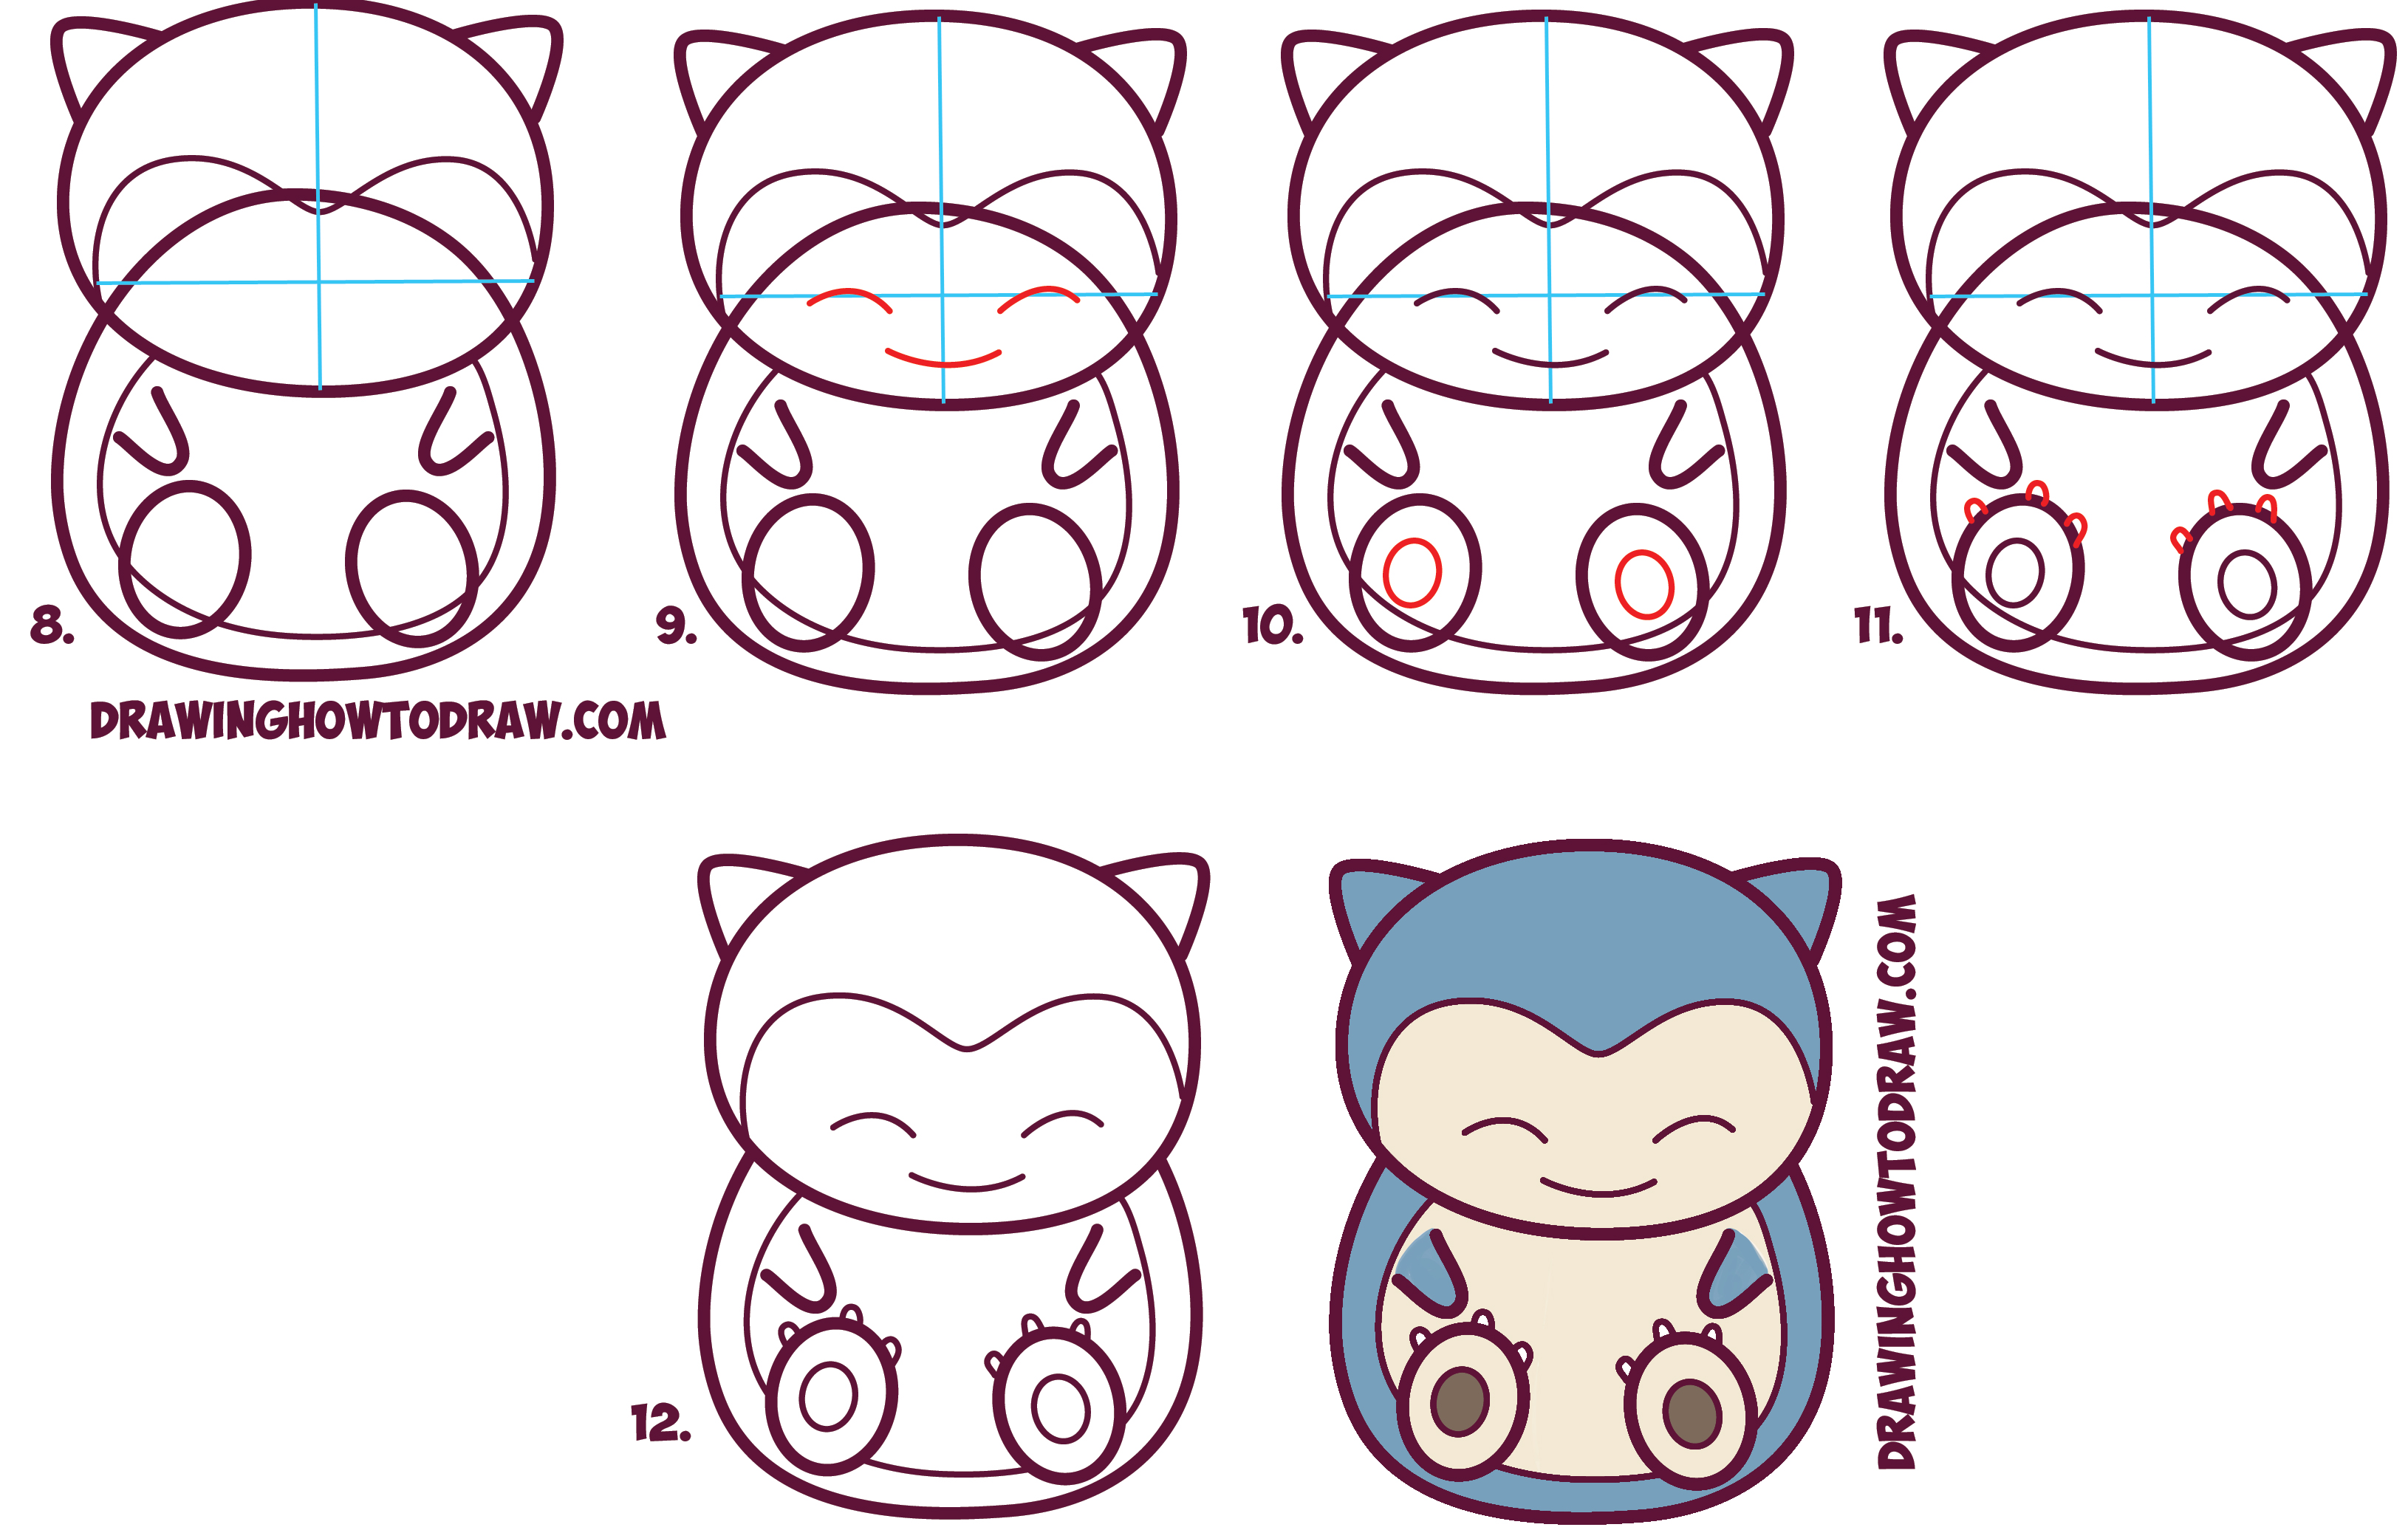 How to Draw Cute Snorlax (Chibi / Kawaii) from Pokemon in Easy Step by